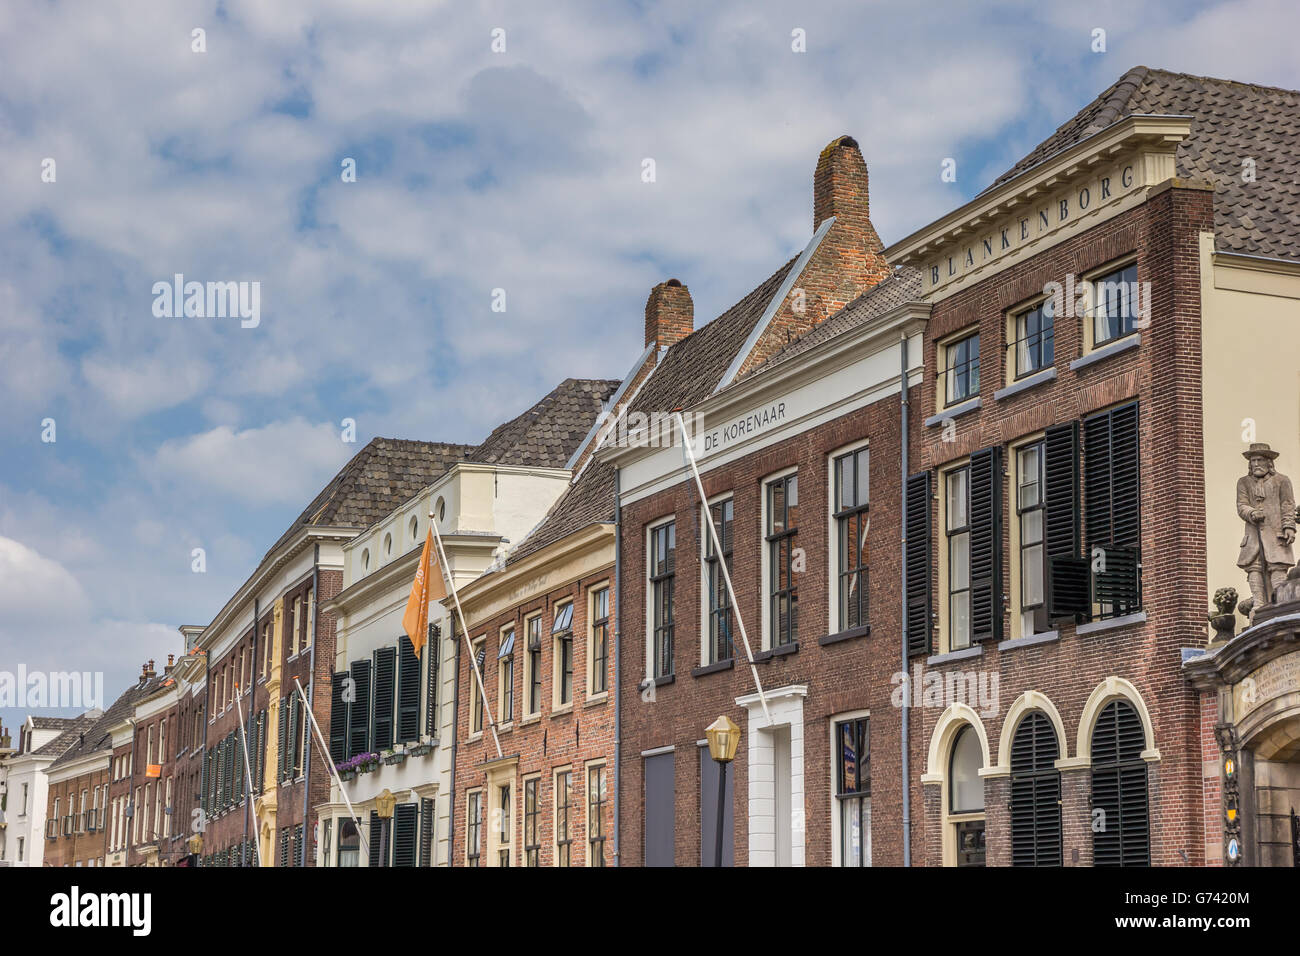 Facades of old houses in Zutphen, The Netherlands Stock Photo